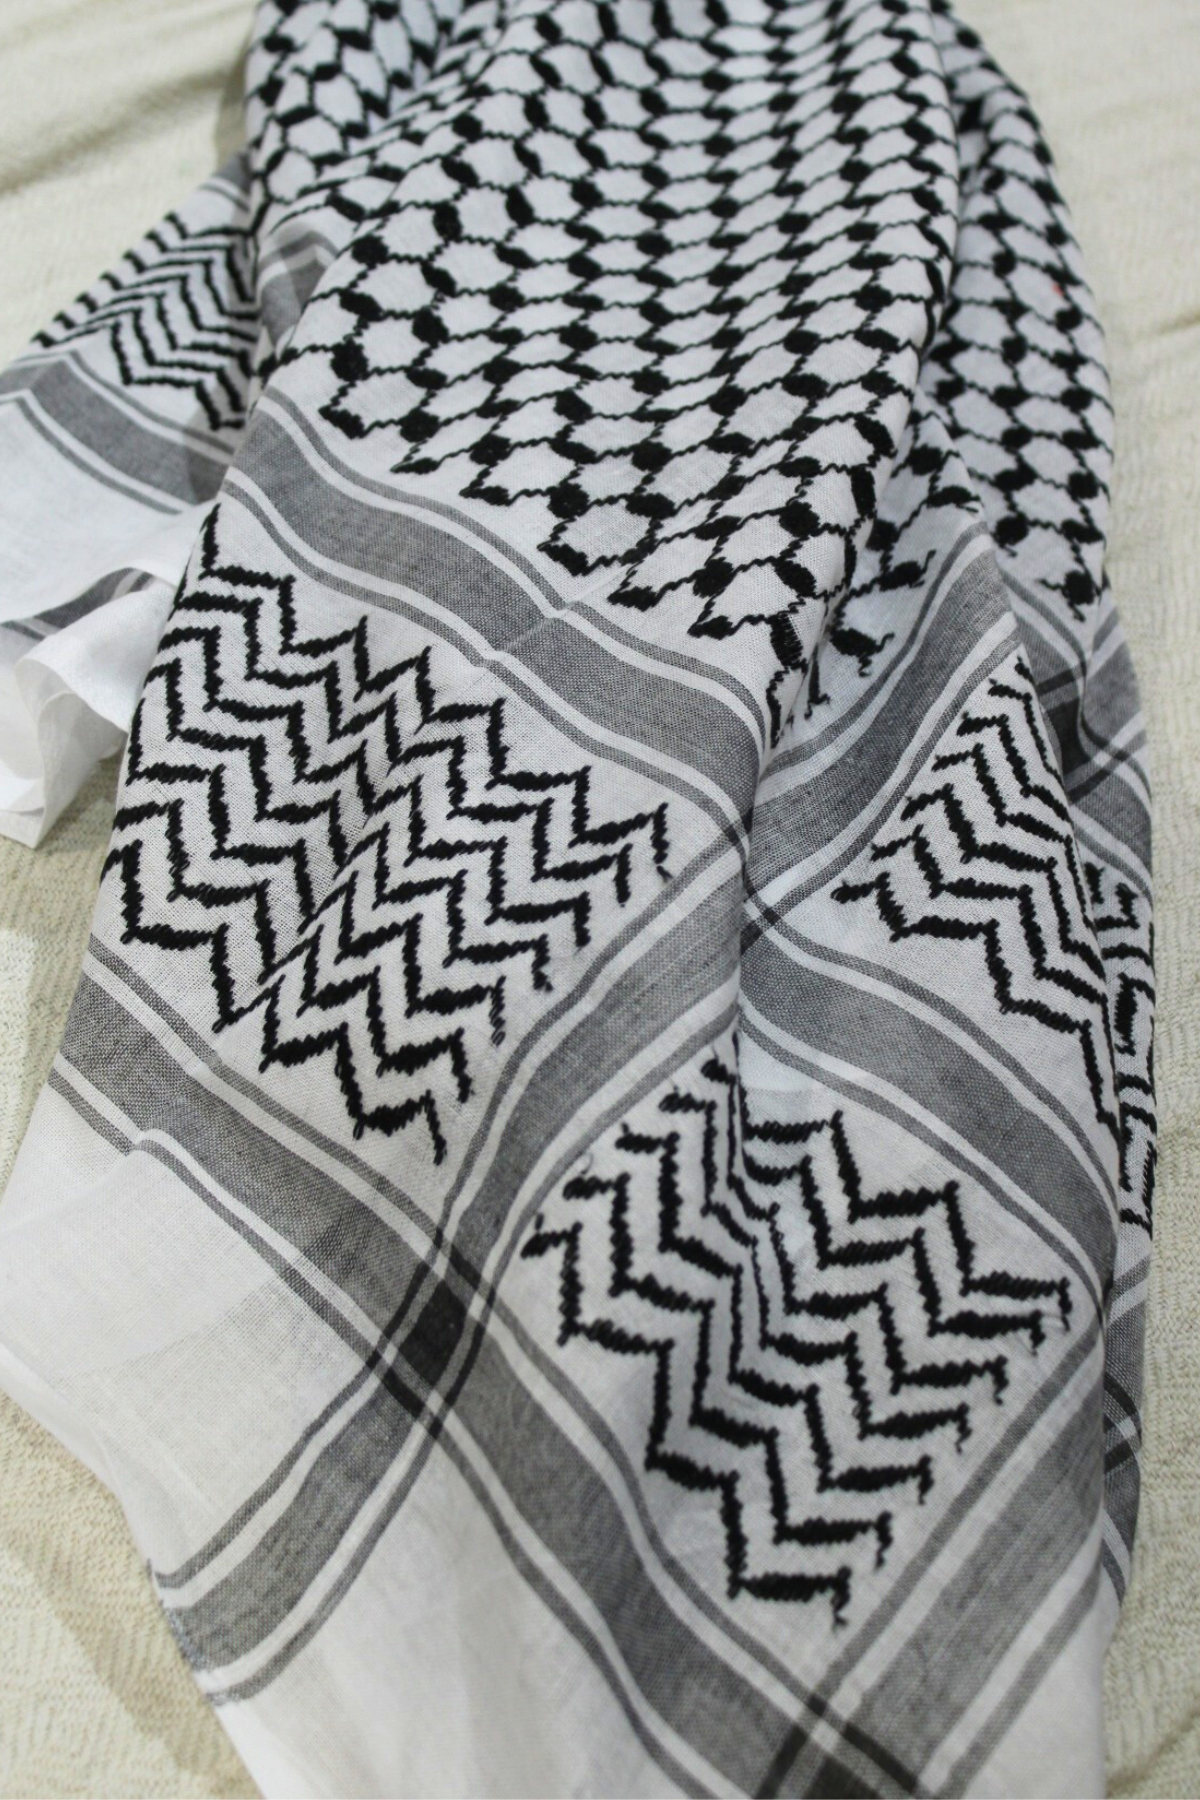 A Palestinian kuffiyeh, a square scarf with a black and white checkered pattern, symbolizes resilience, heritage, and solidarity in the struggle for justice and freedom